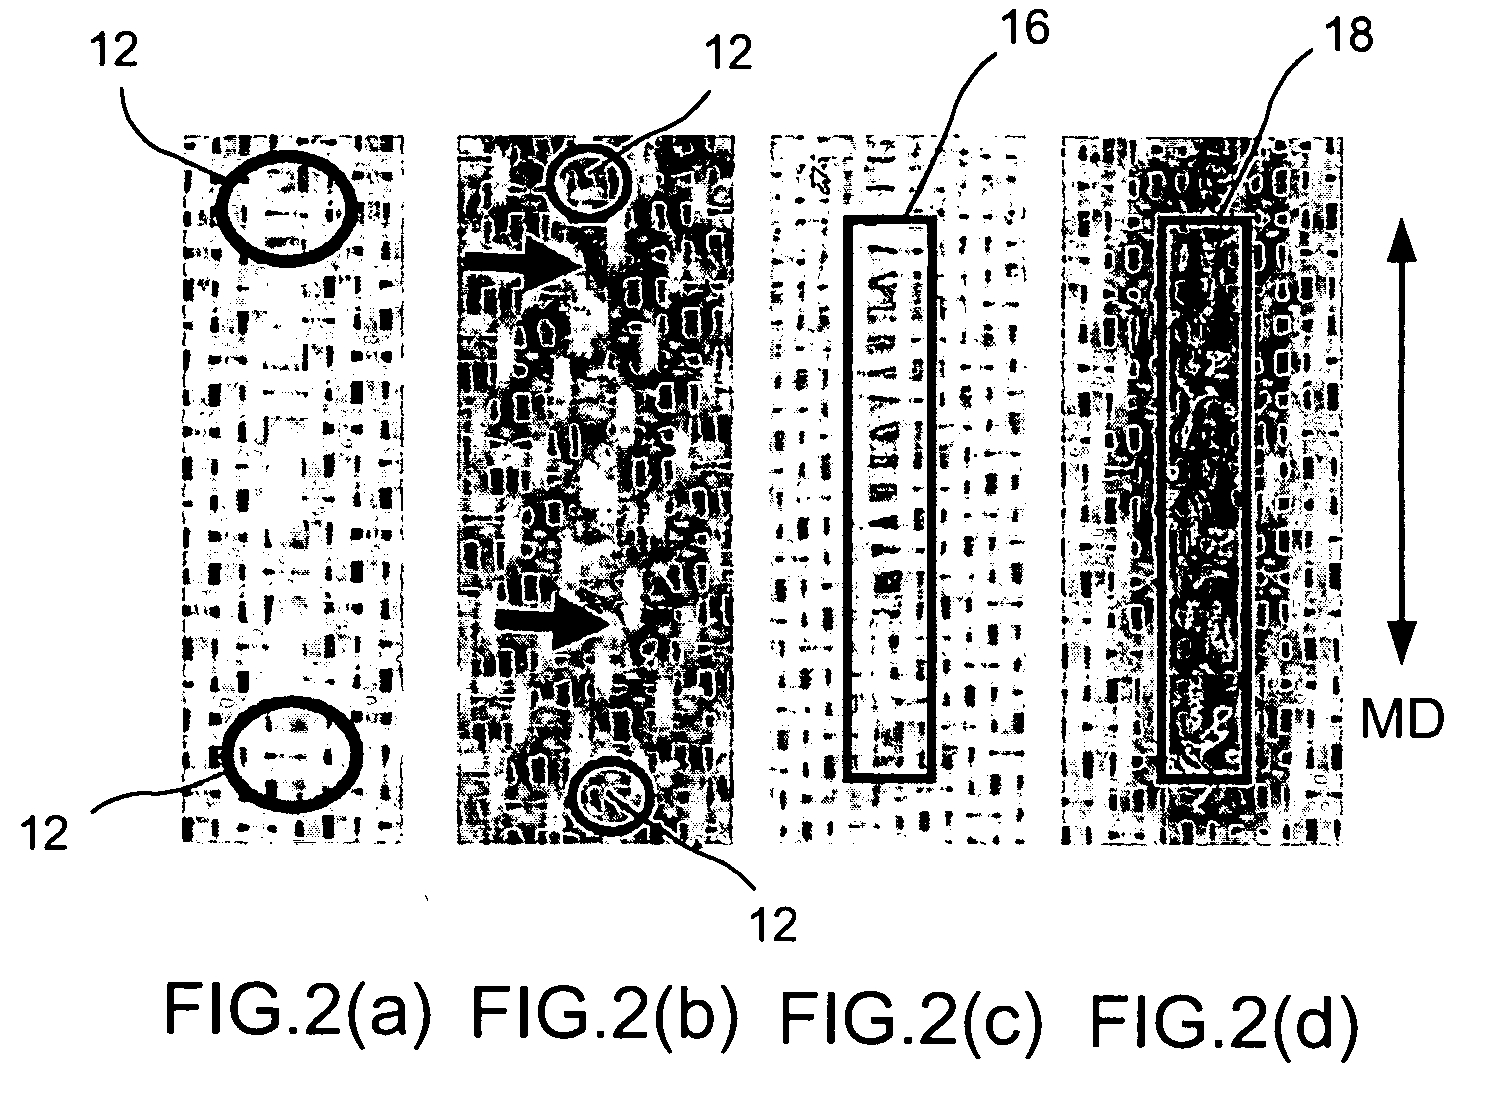 Process for producing papermaker's and industrial fabric seam and seam produced by that method